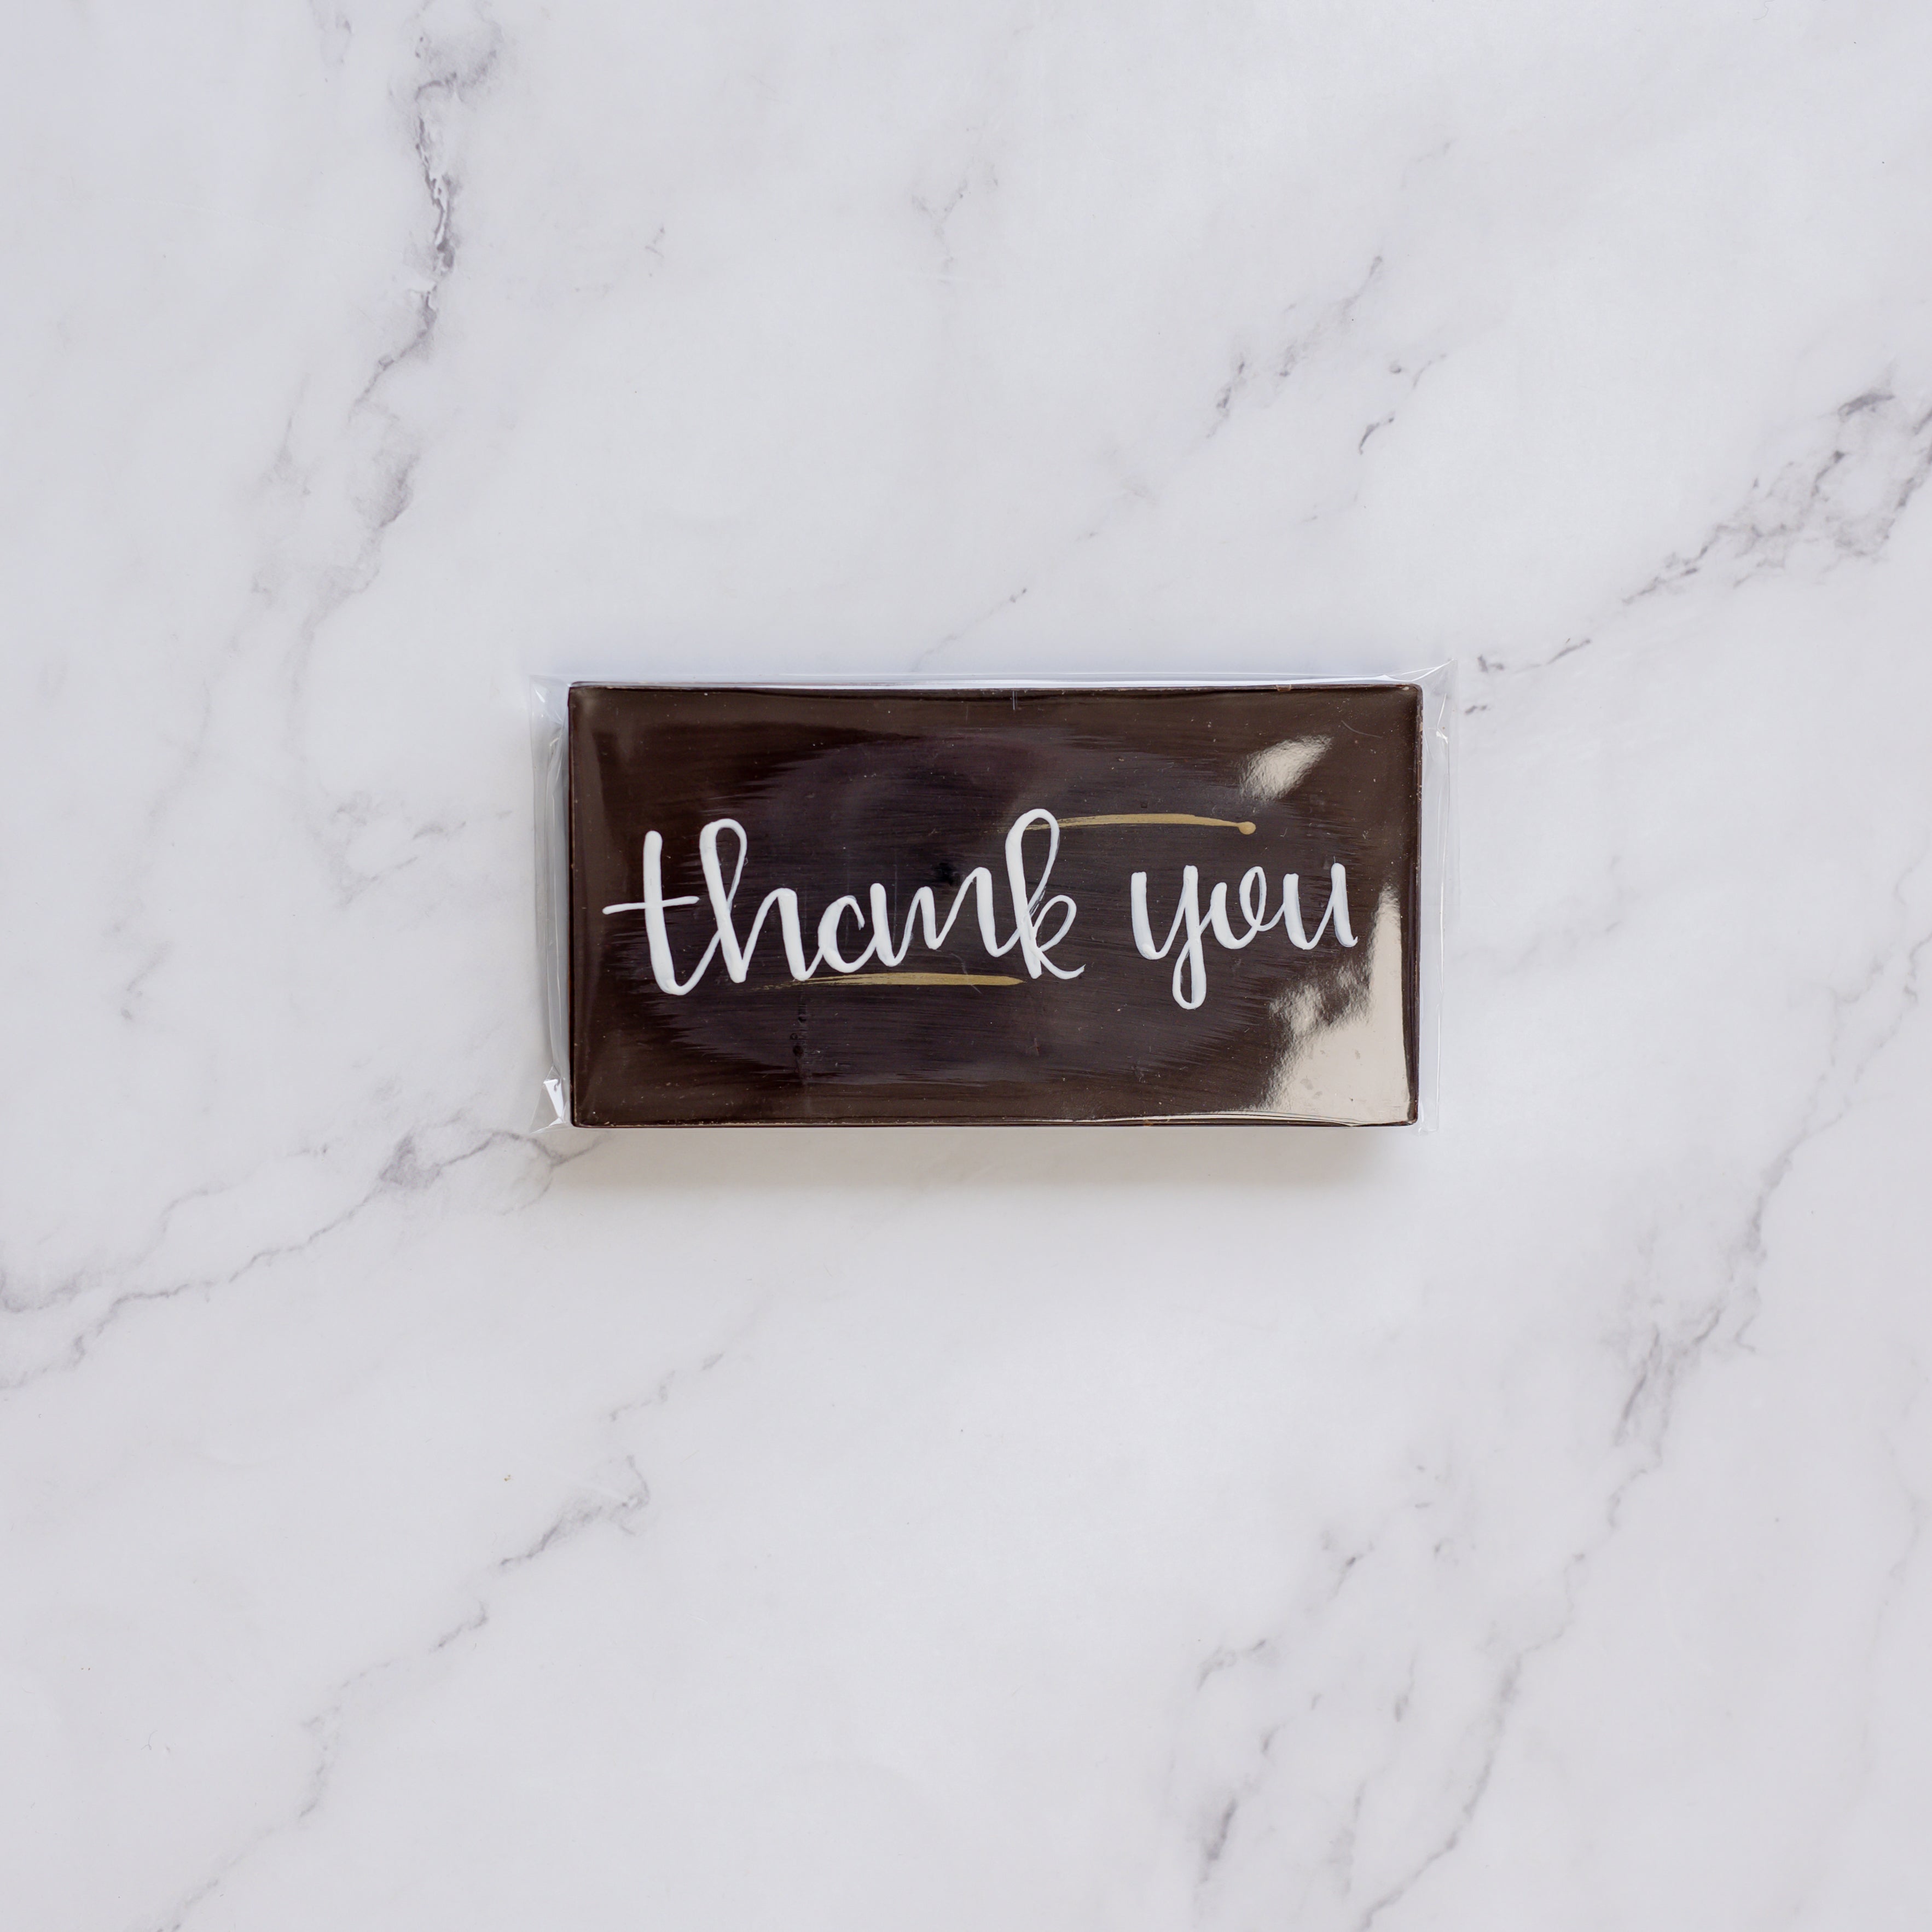 The Bake Site - hand painted chocolate bar